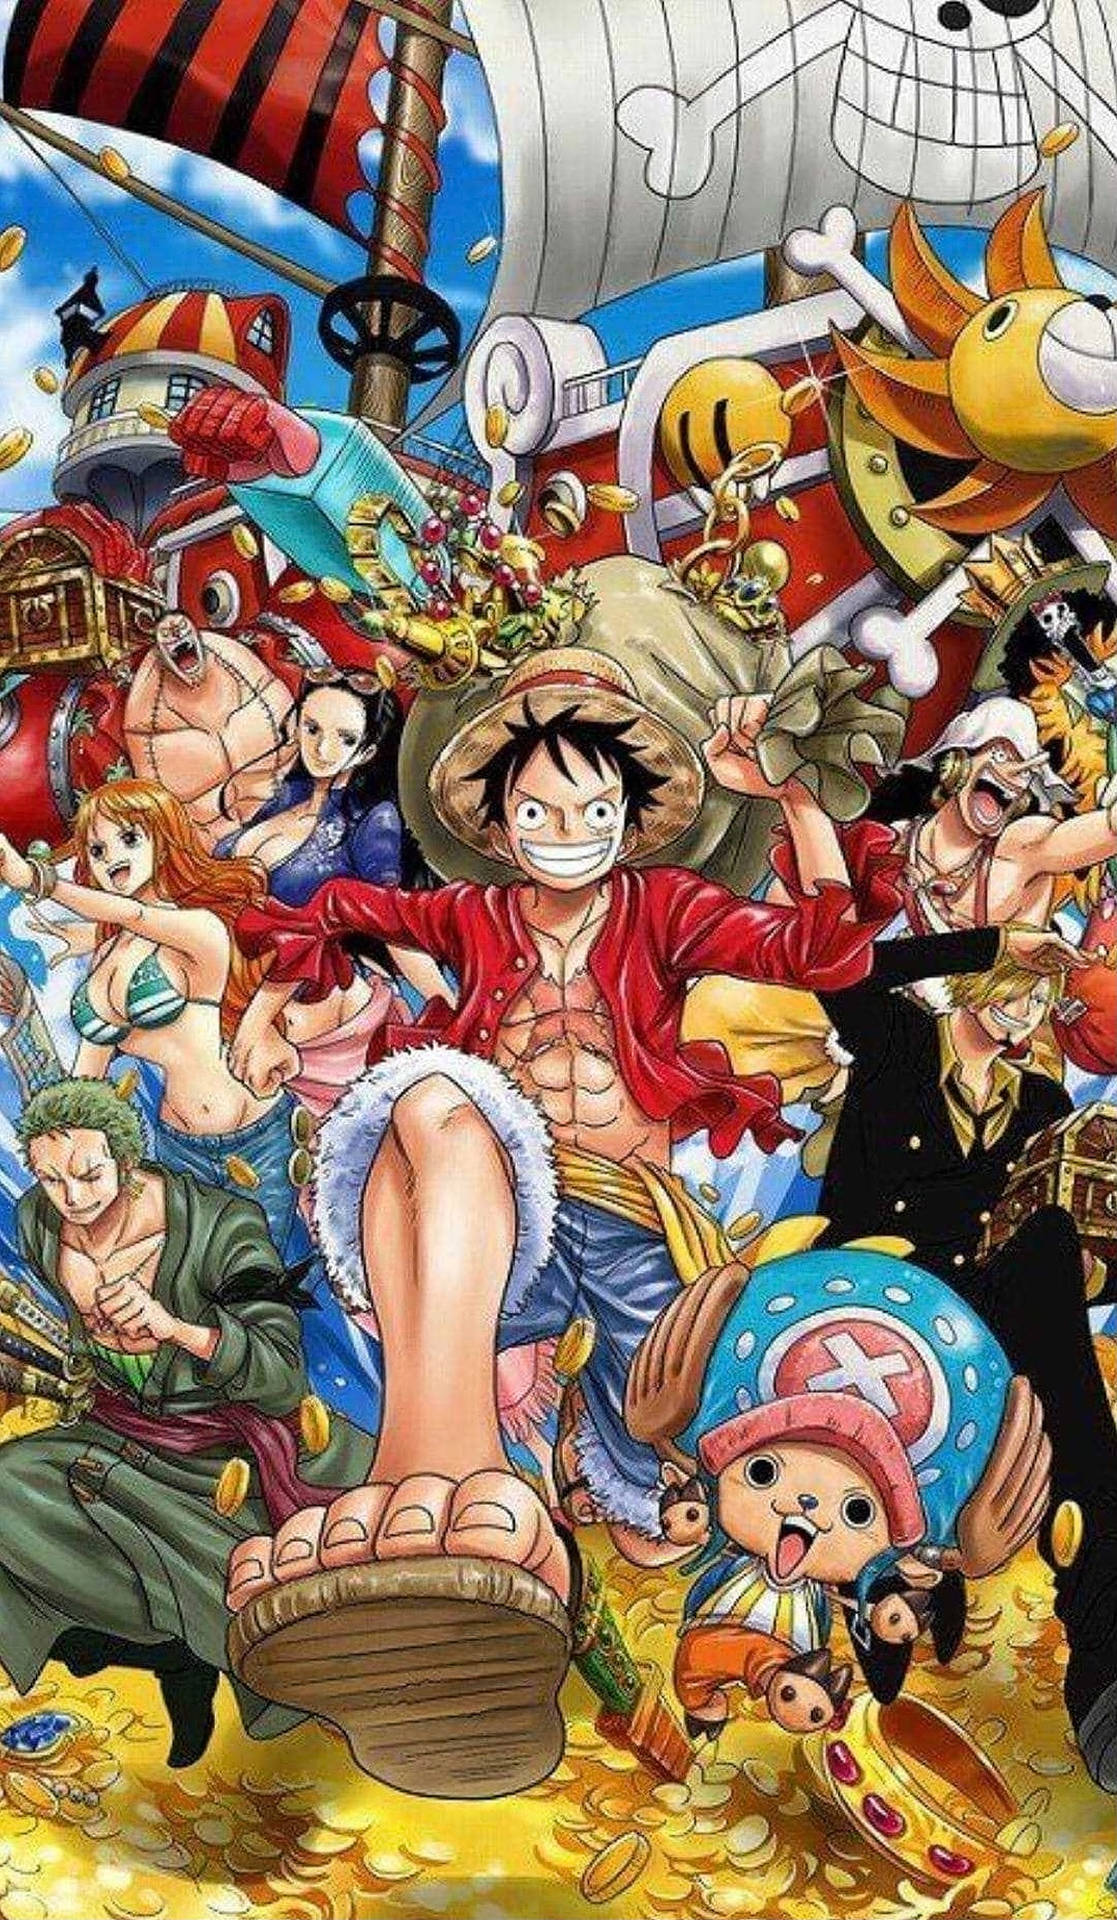  200 One Piece Iphone Wallpapers Wallpapers com